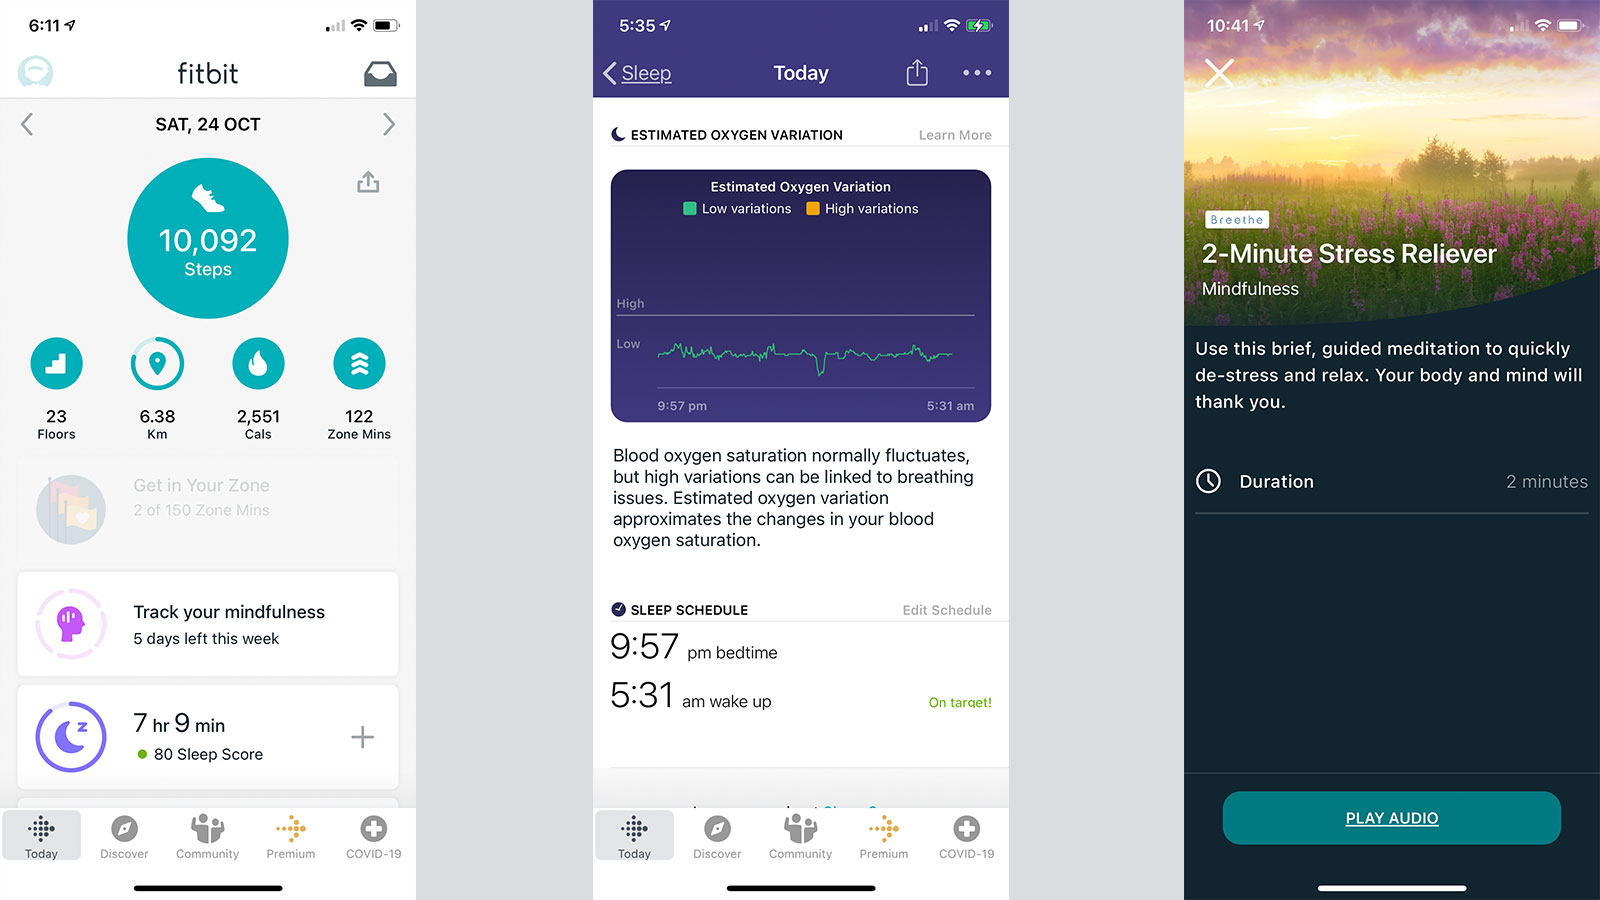 Fitness tracking stats in the Fitbit mobile app